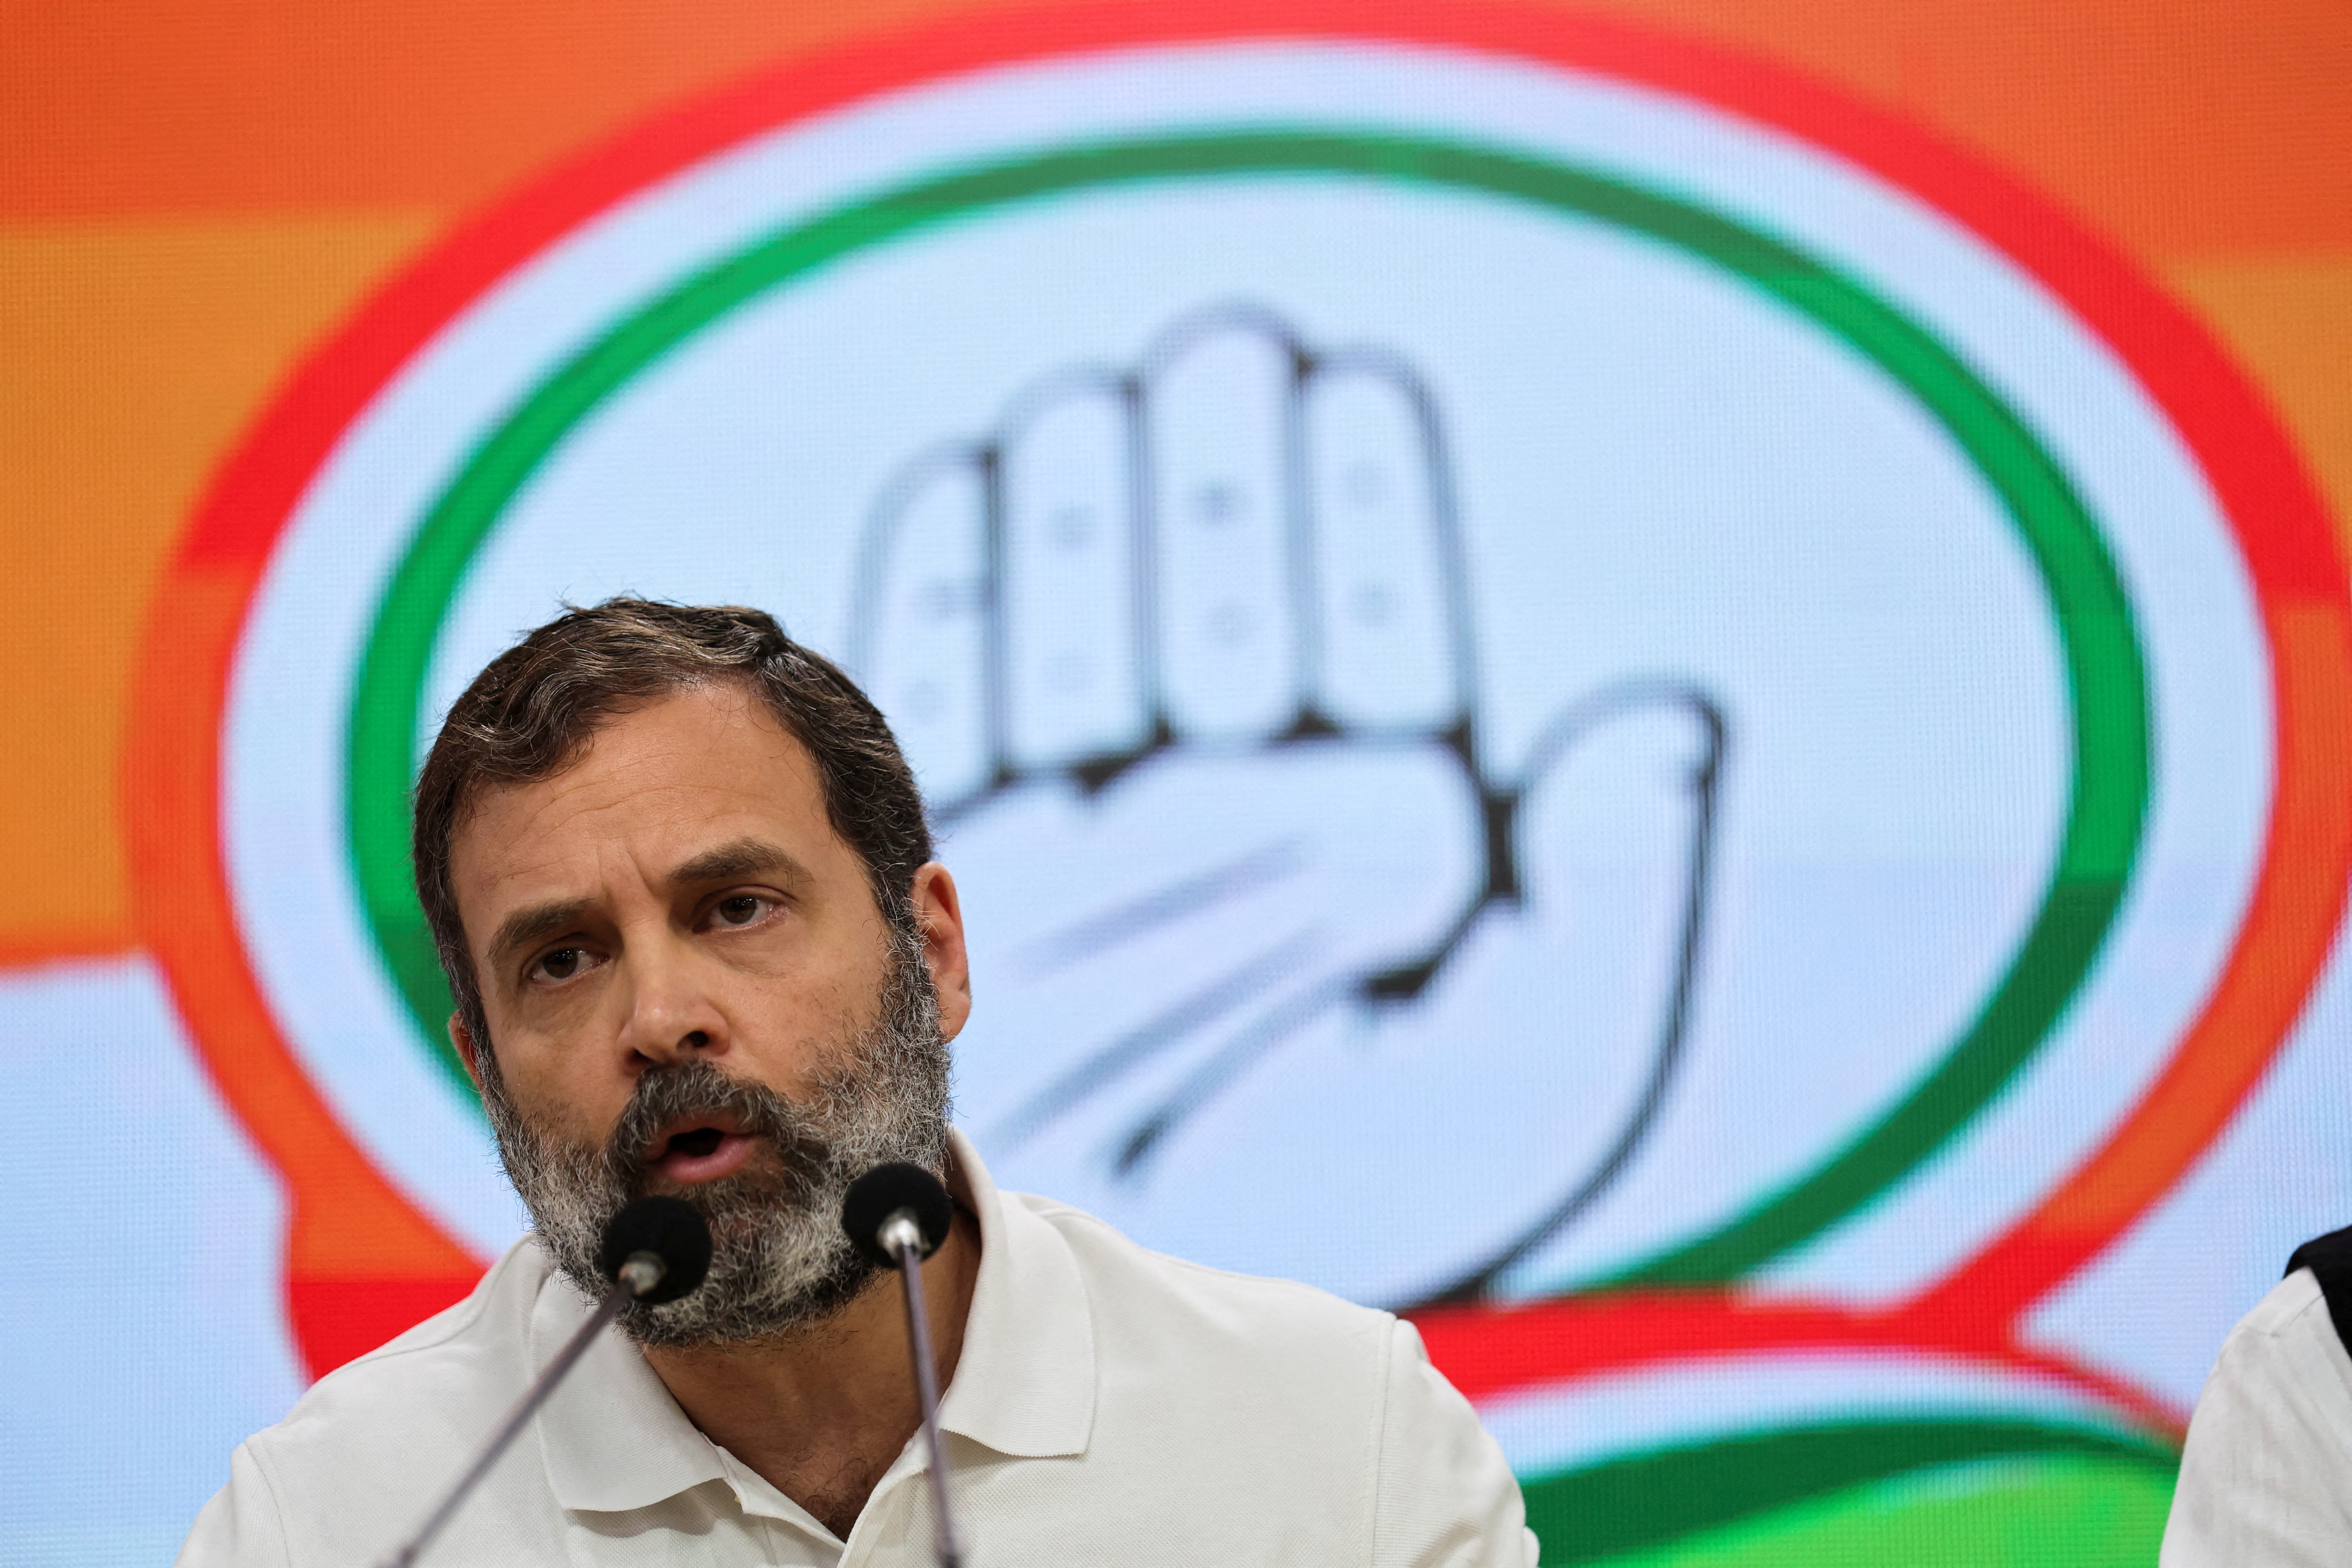 Why Indian opposition leader Rahul Gandhi faces jail for defamation